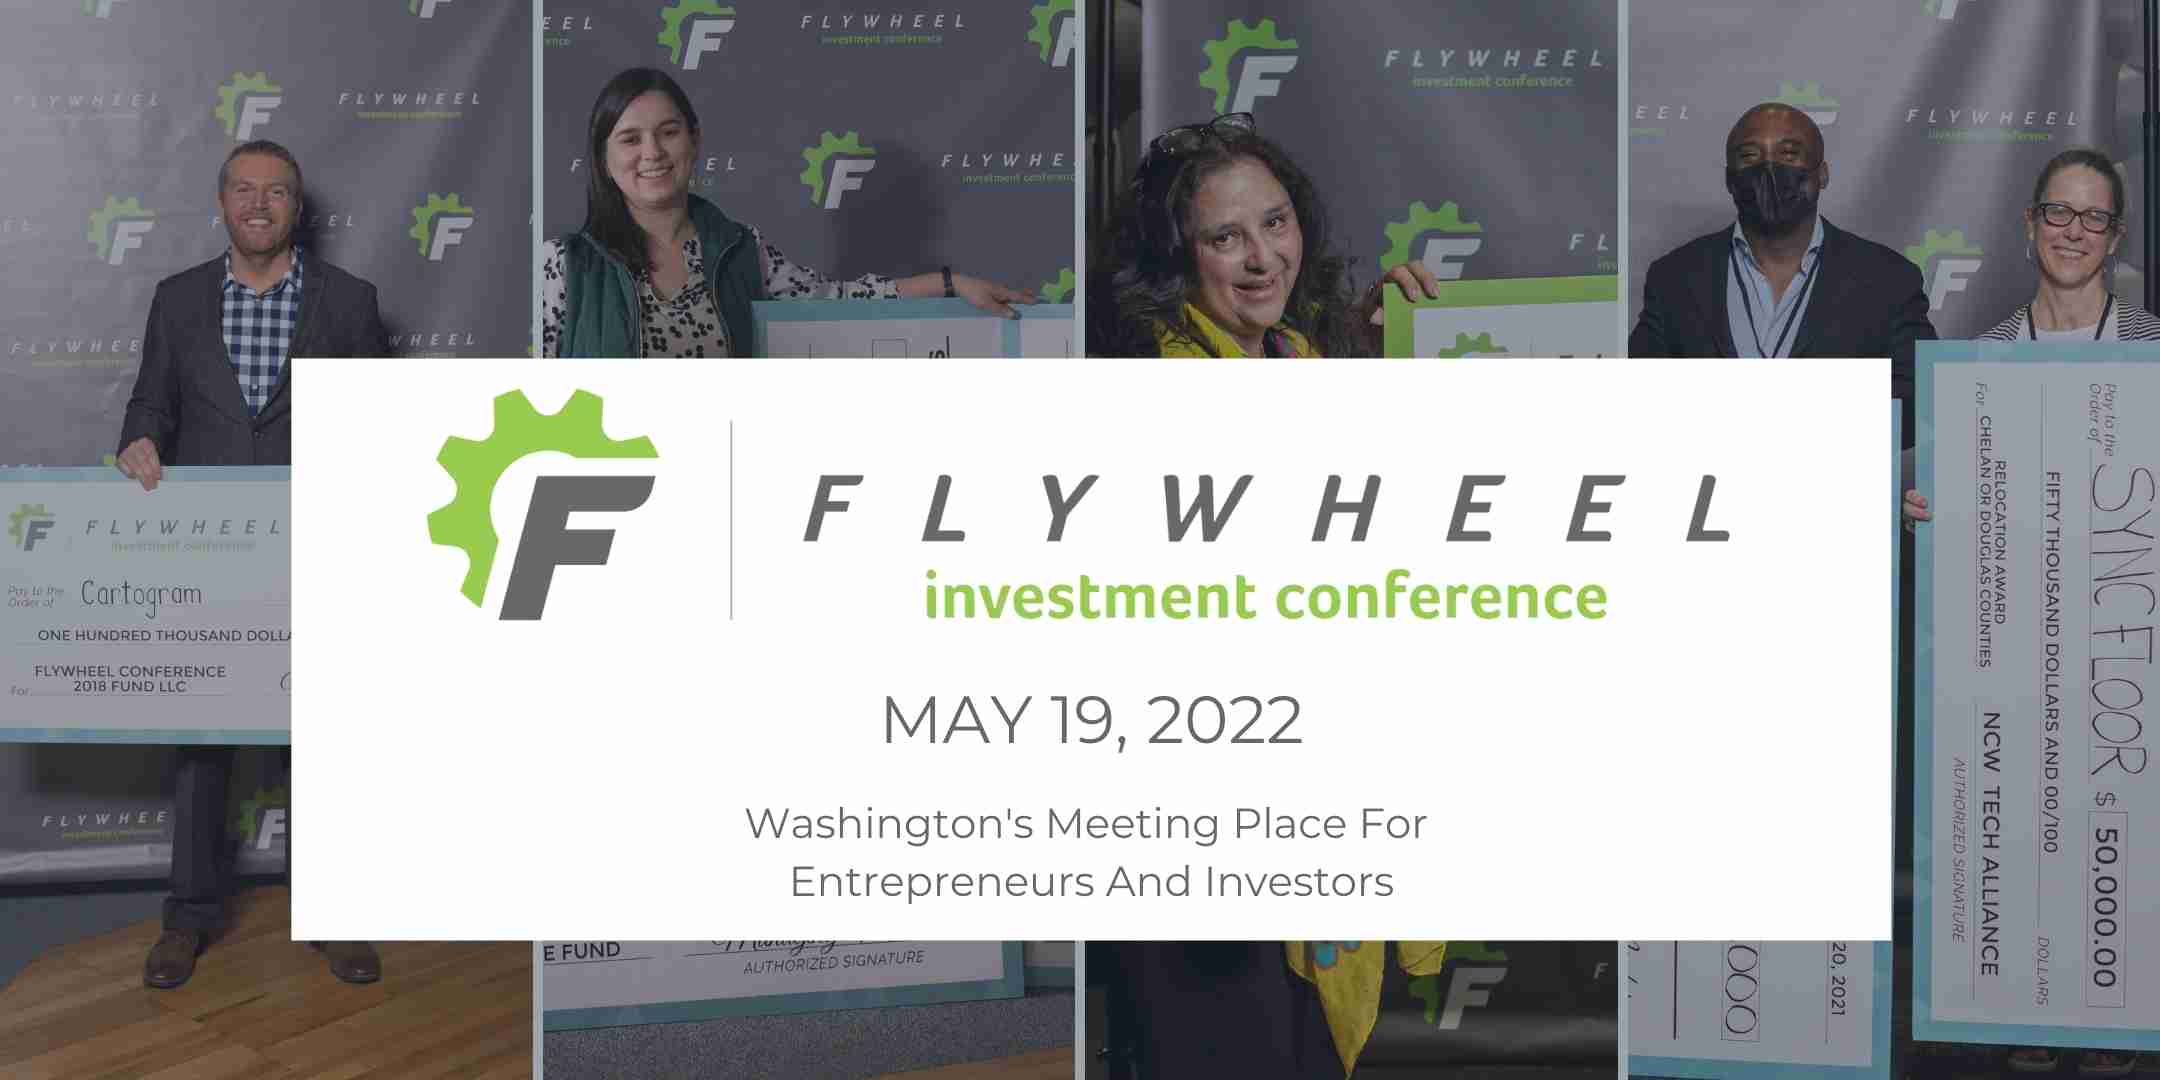 <h1 class="tribe-events-single-event-title">Flywheel Investment Conference</h1>